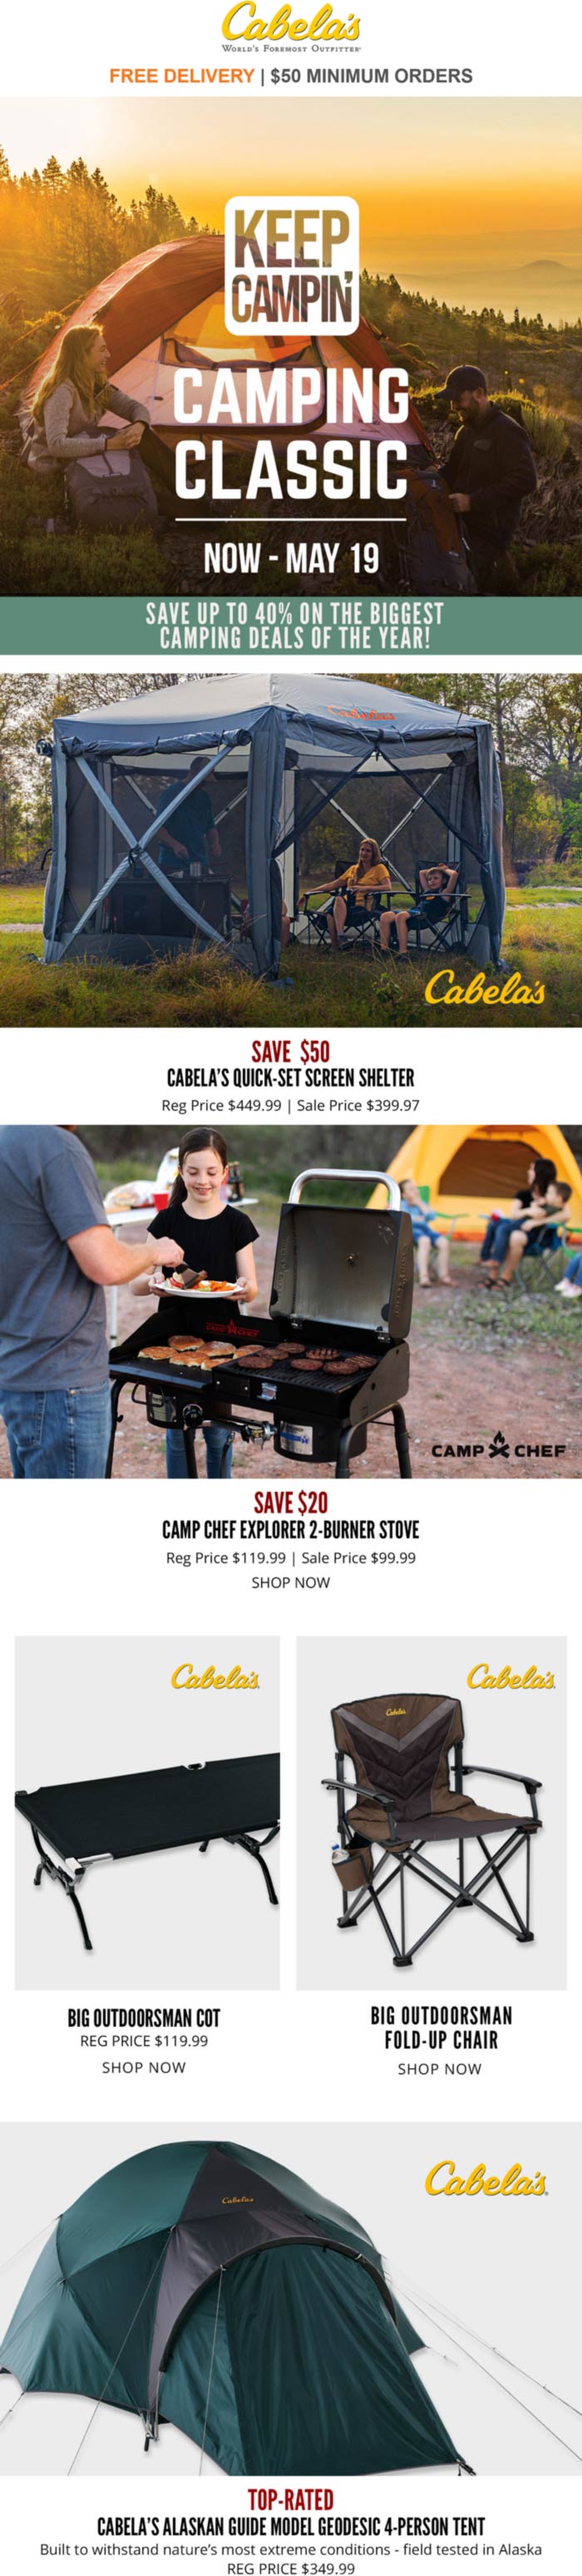 Cabelas stores Coupon  Various 40% off camping deals at Cabelas outdoors outfitter #cabelas 